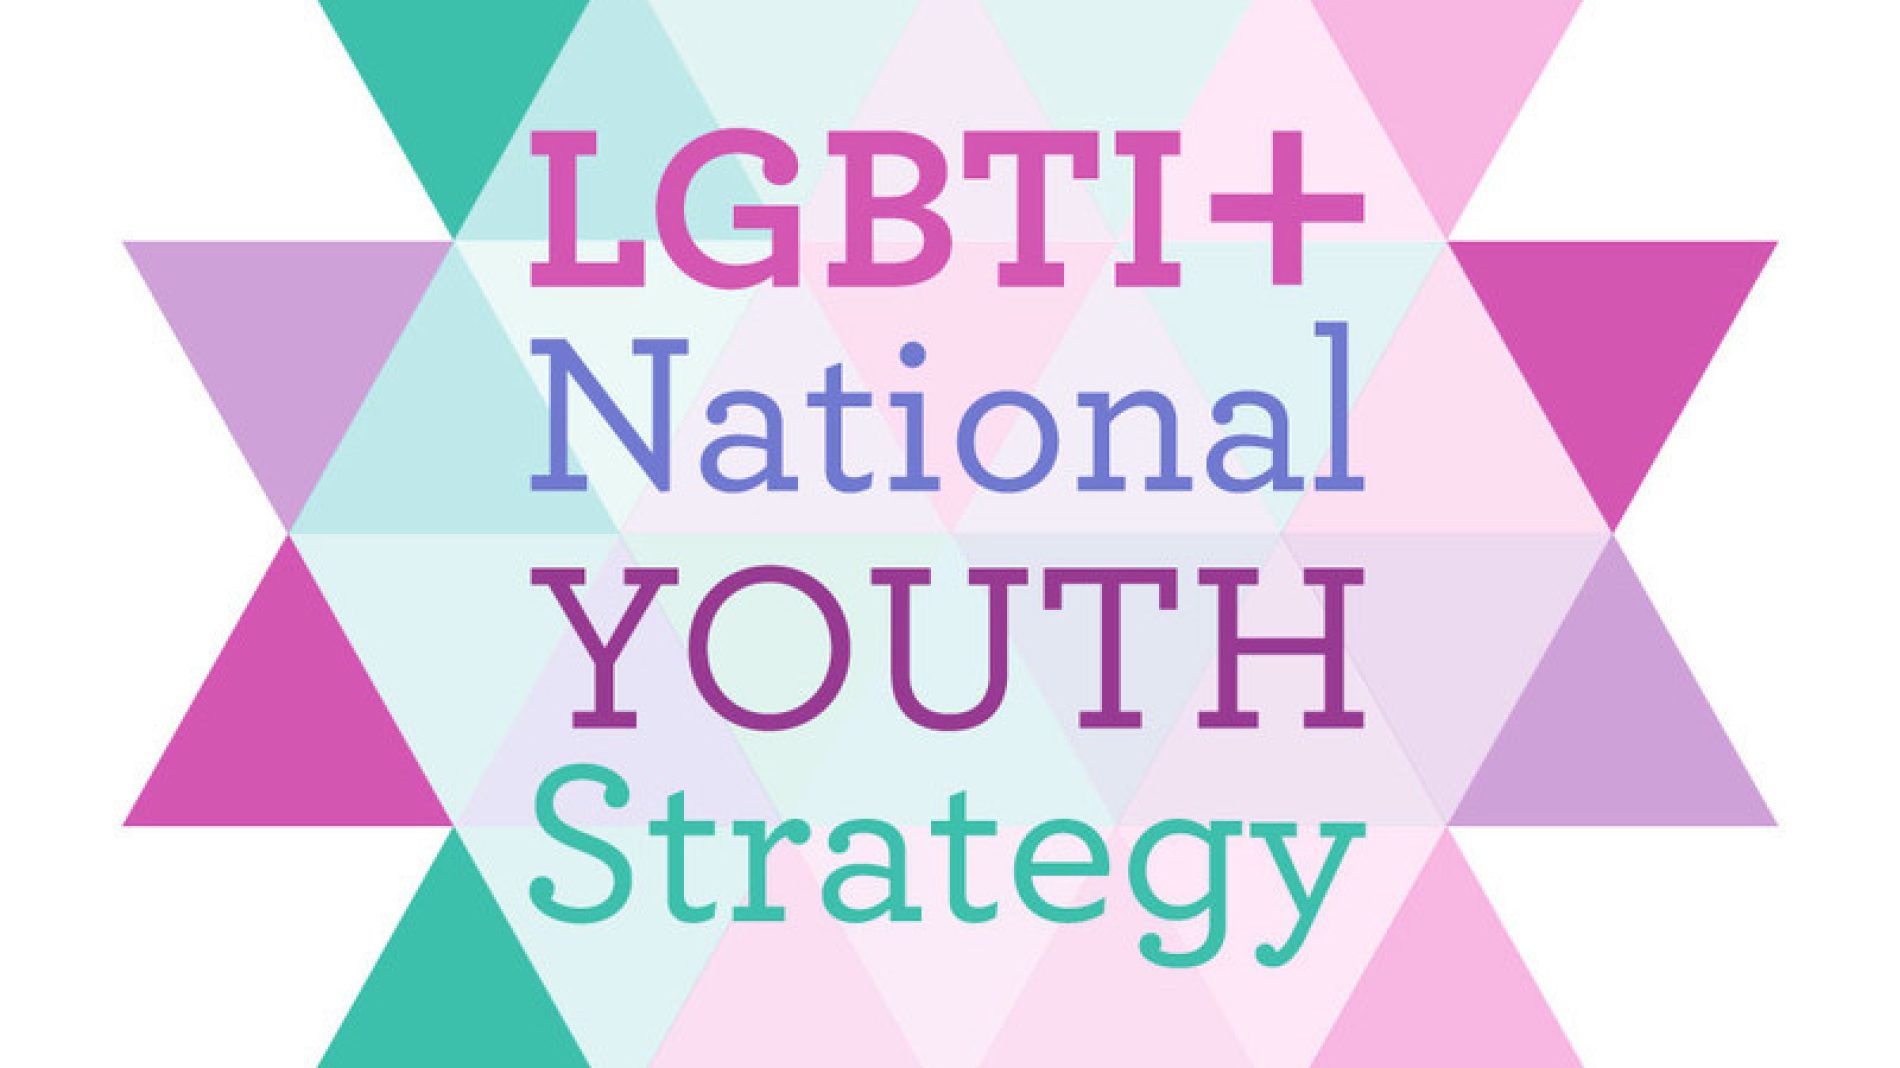 The logo of the LGBTI+ National Youth Strategy